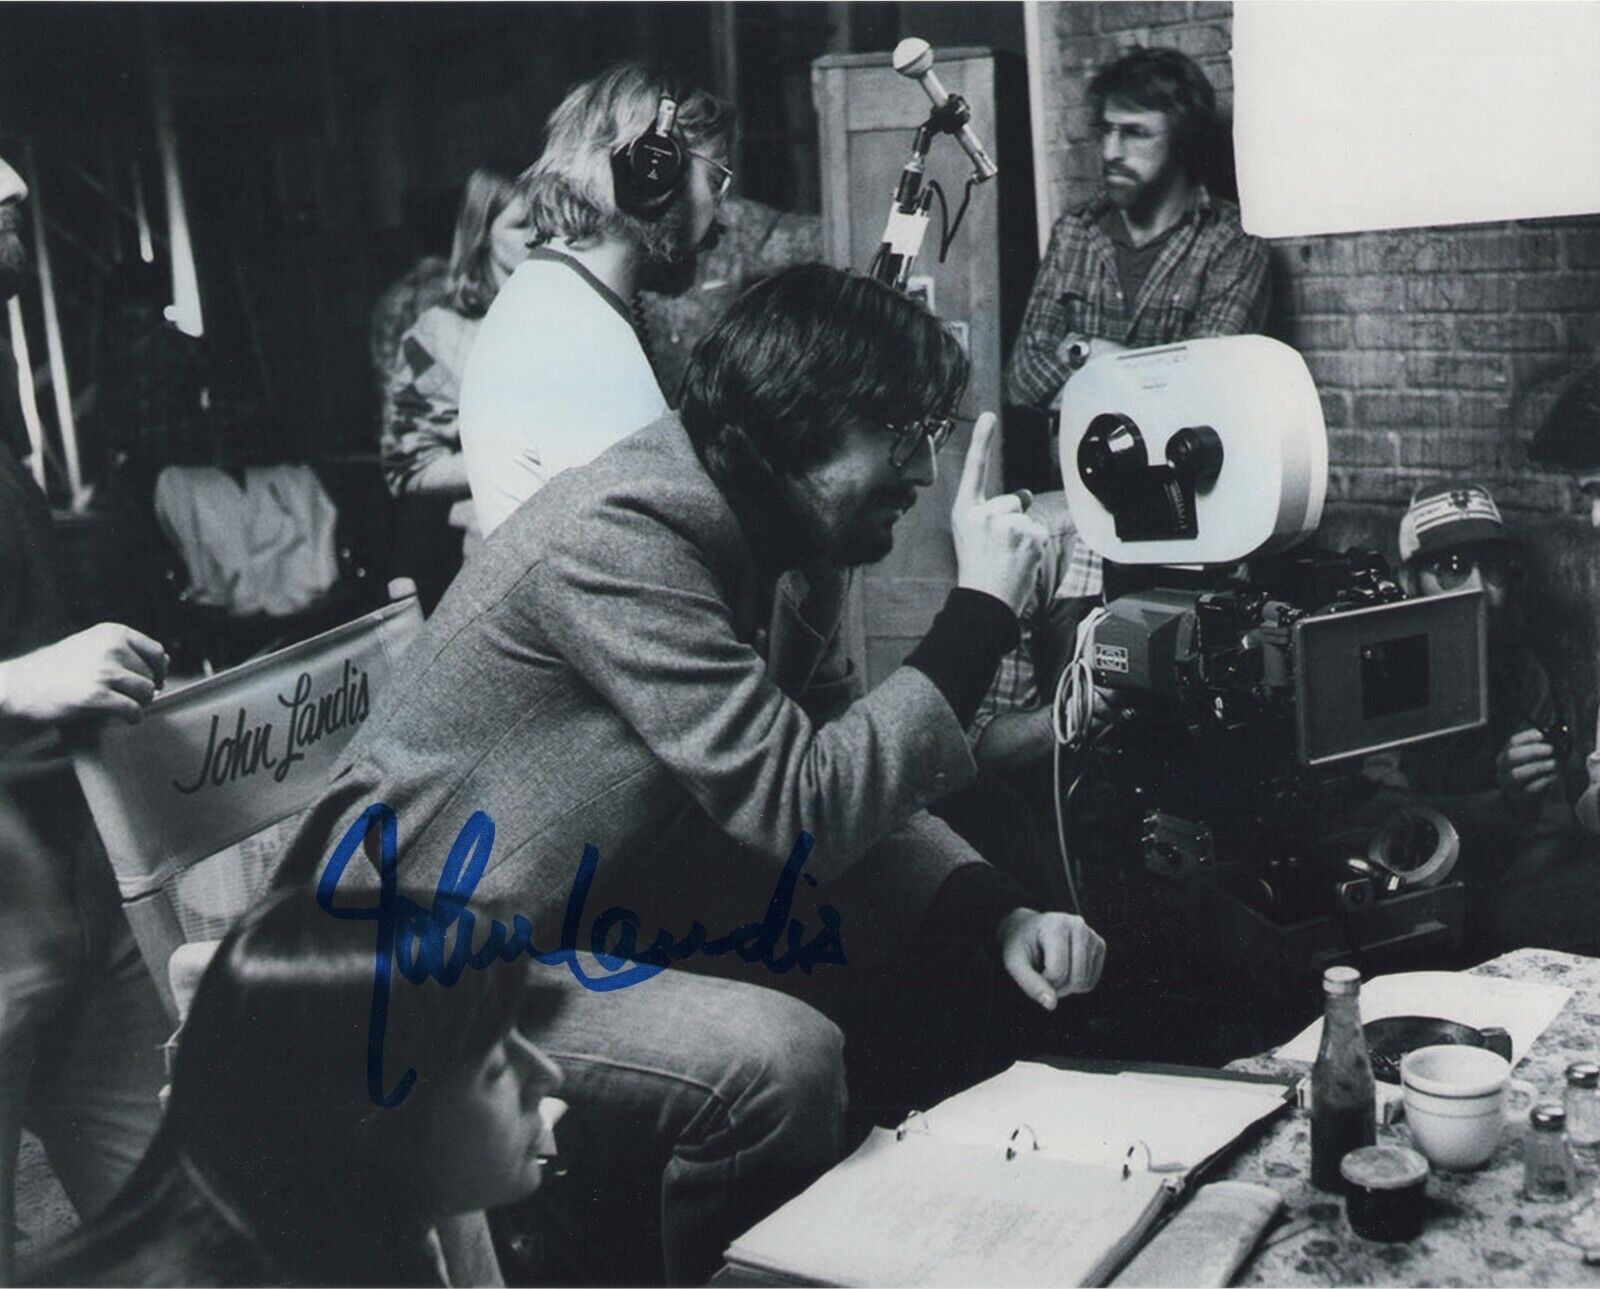 JOHN LANDIS SIGNED AUTOGRAPH 8X10 Photo Poster painting THRILLER ANIMAL HOUSE #2